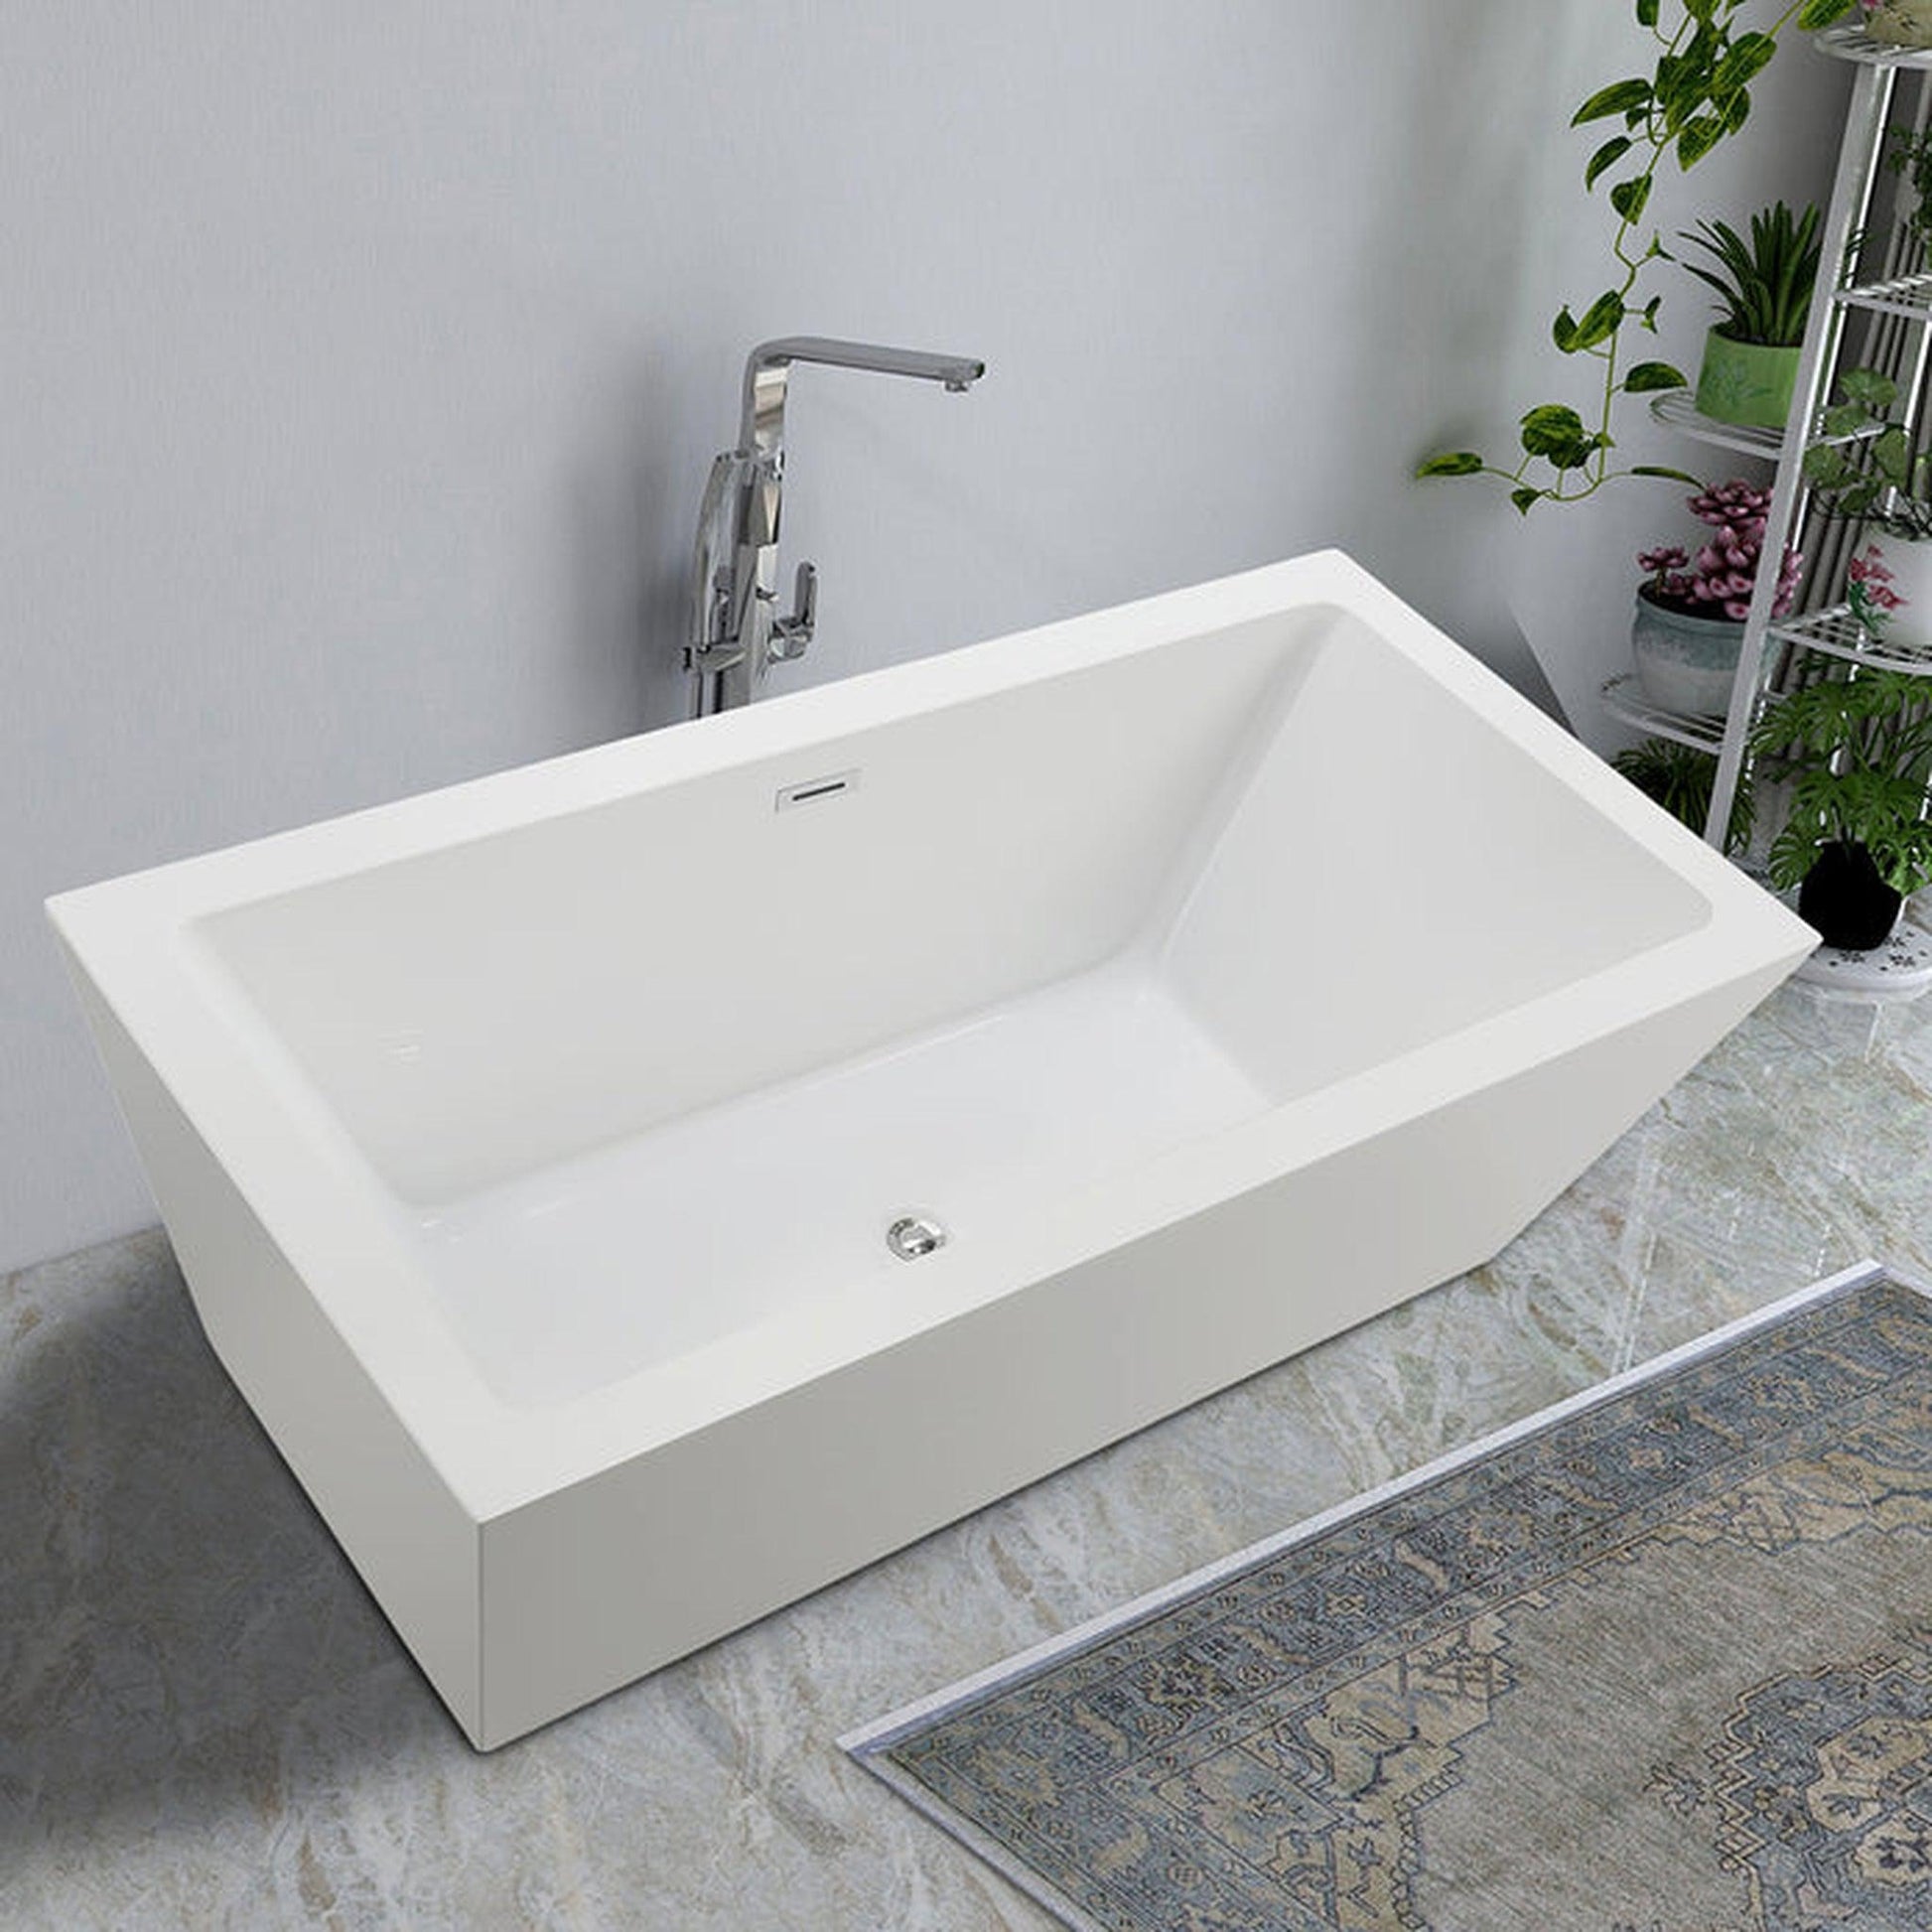 Vanity Art 67" x 32" White Acrylic Rectangle Freestanding Bathtub With Polished Chrome Pop-up Drain, Slotted Overflow and Flexible Drain Hose